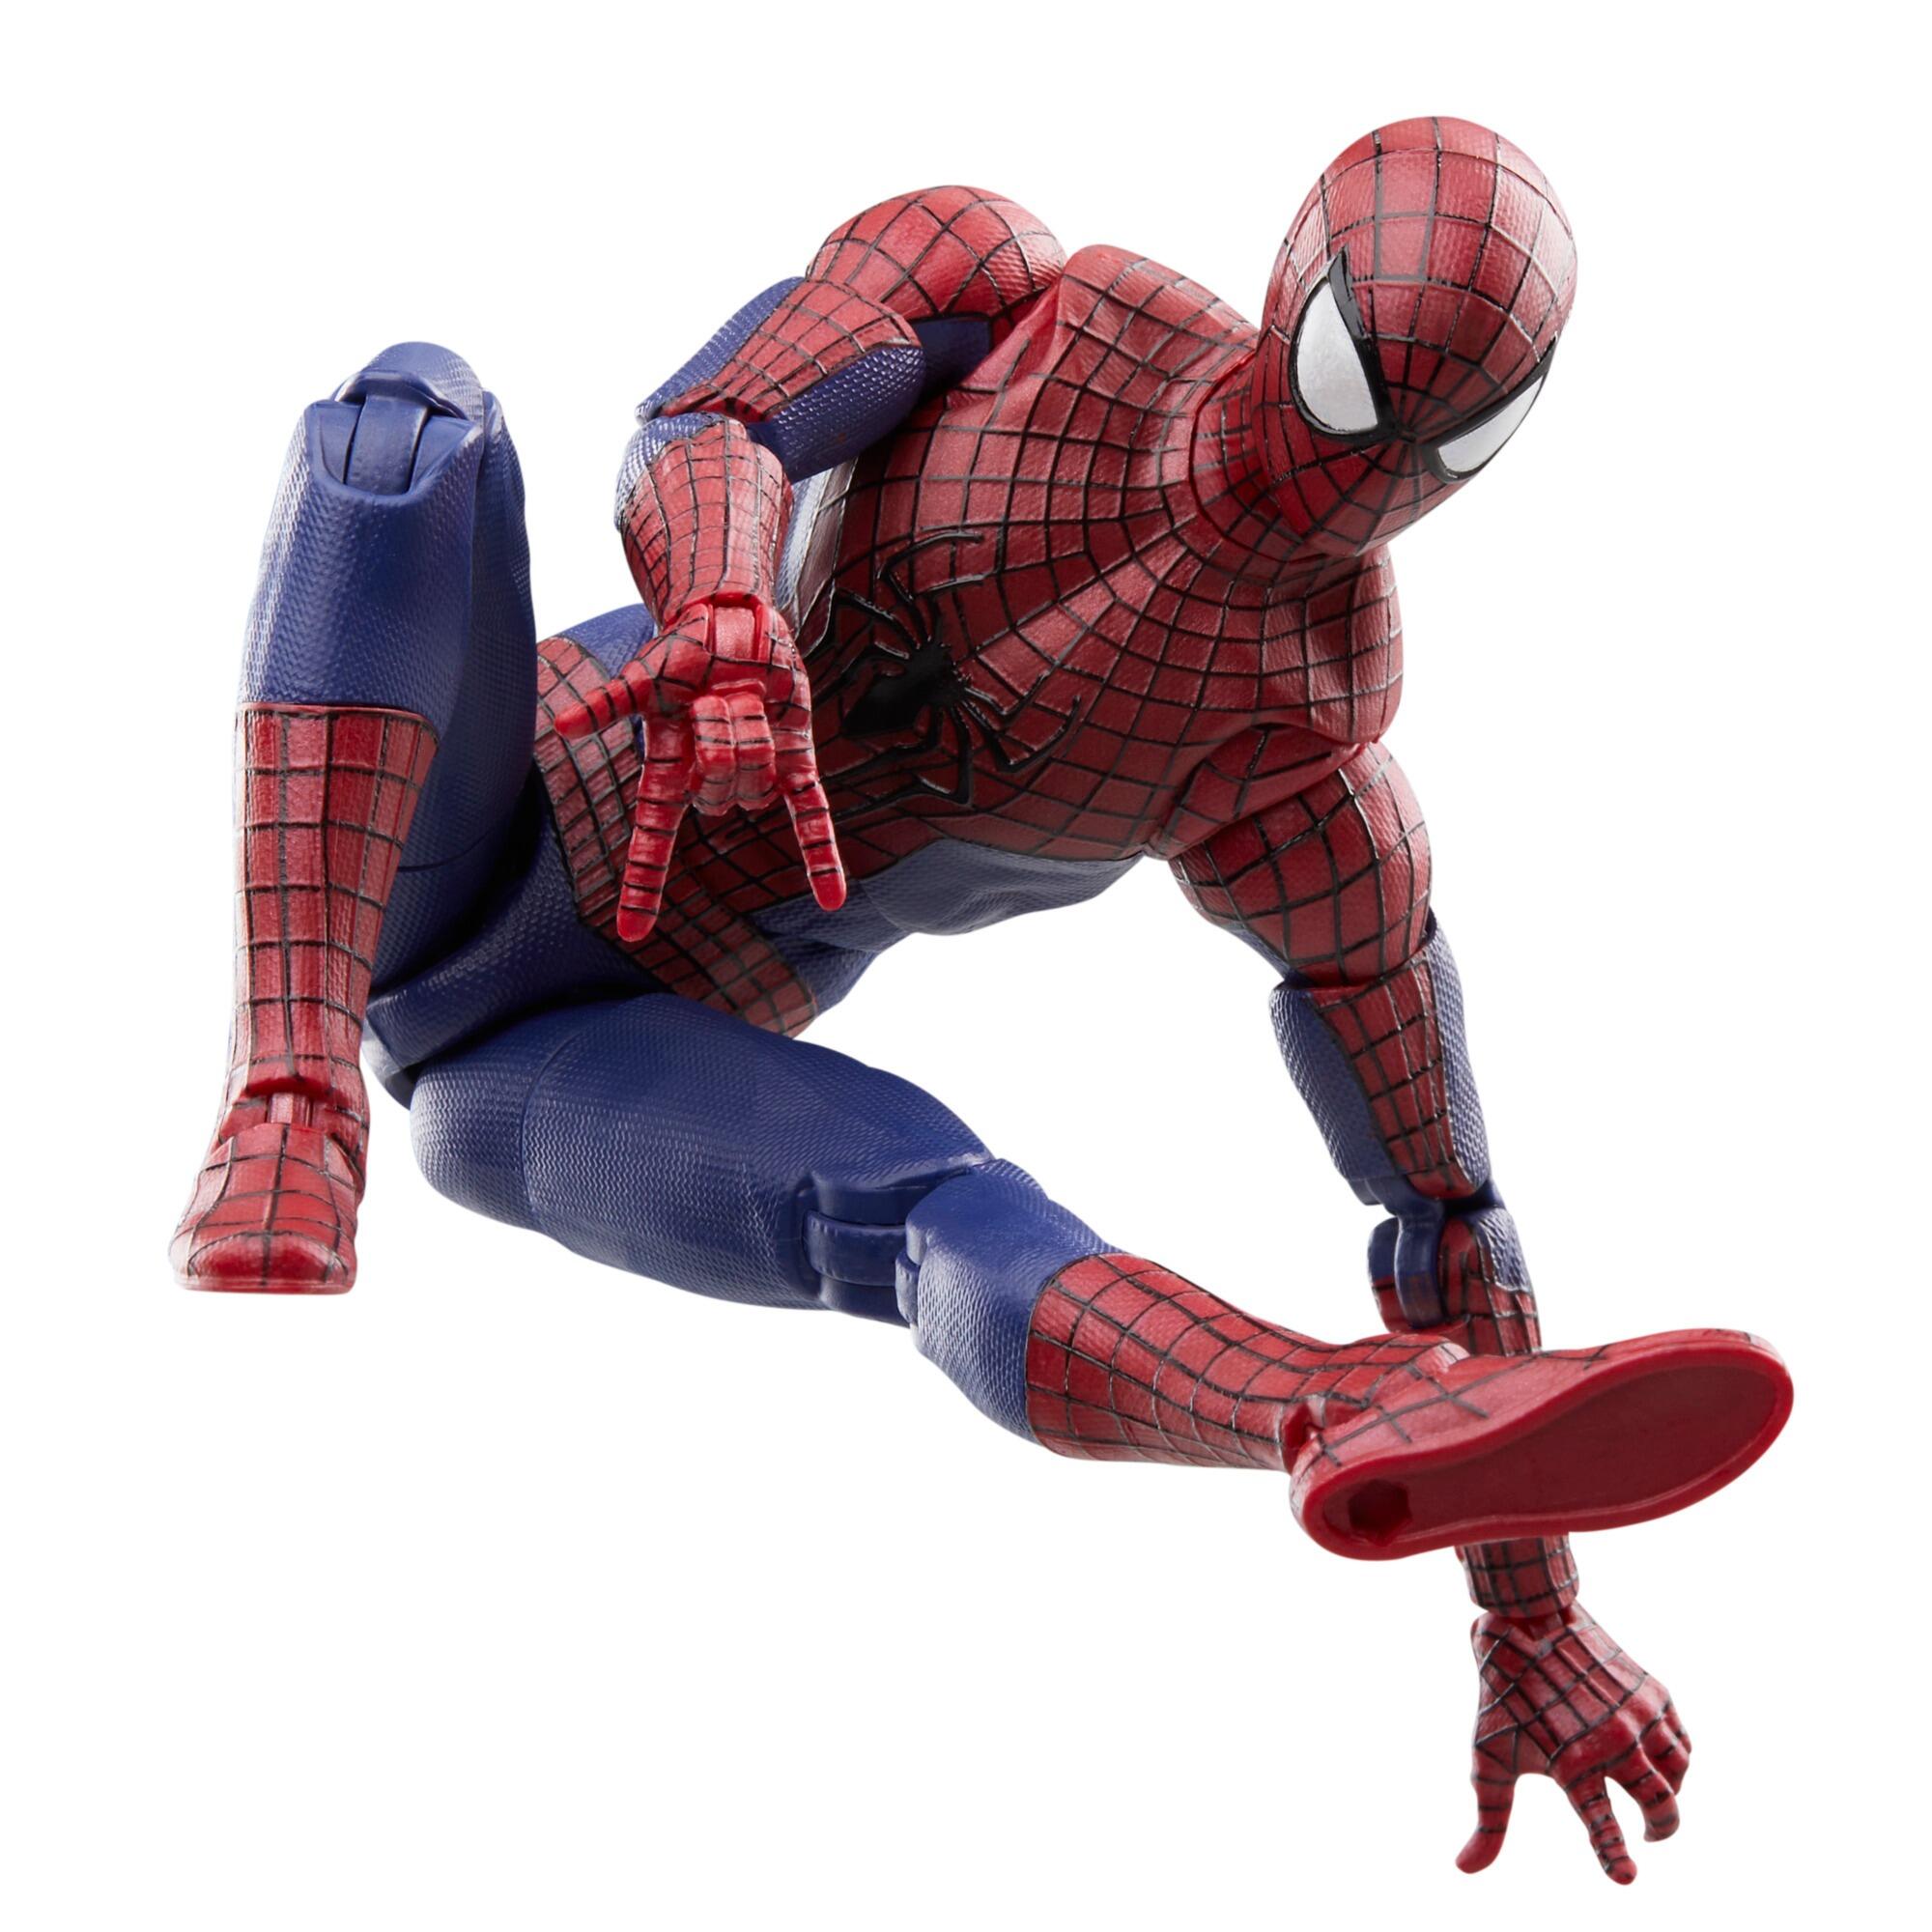 Marvel Legends Spider-Man and His Amazing Friends Set Review 